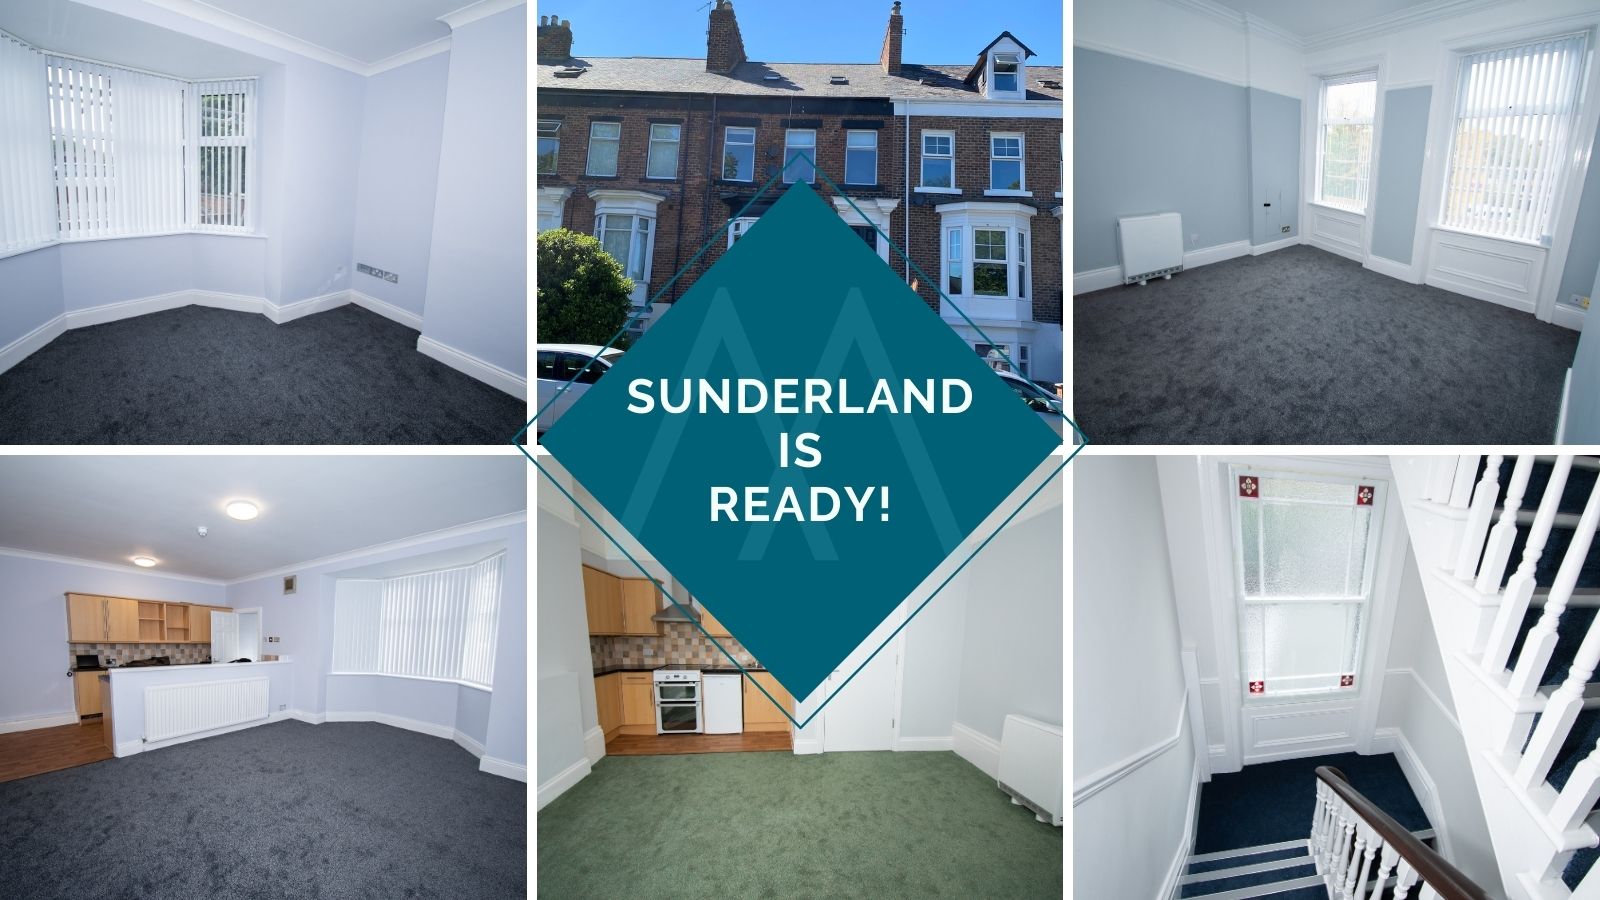 6 images of the inside of a recently refurbished property with the text 'sunderland is ready' written in the centre